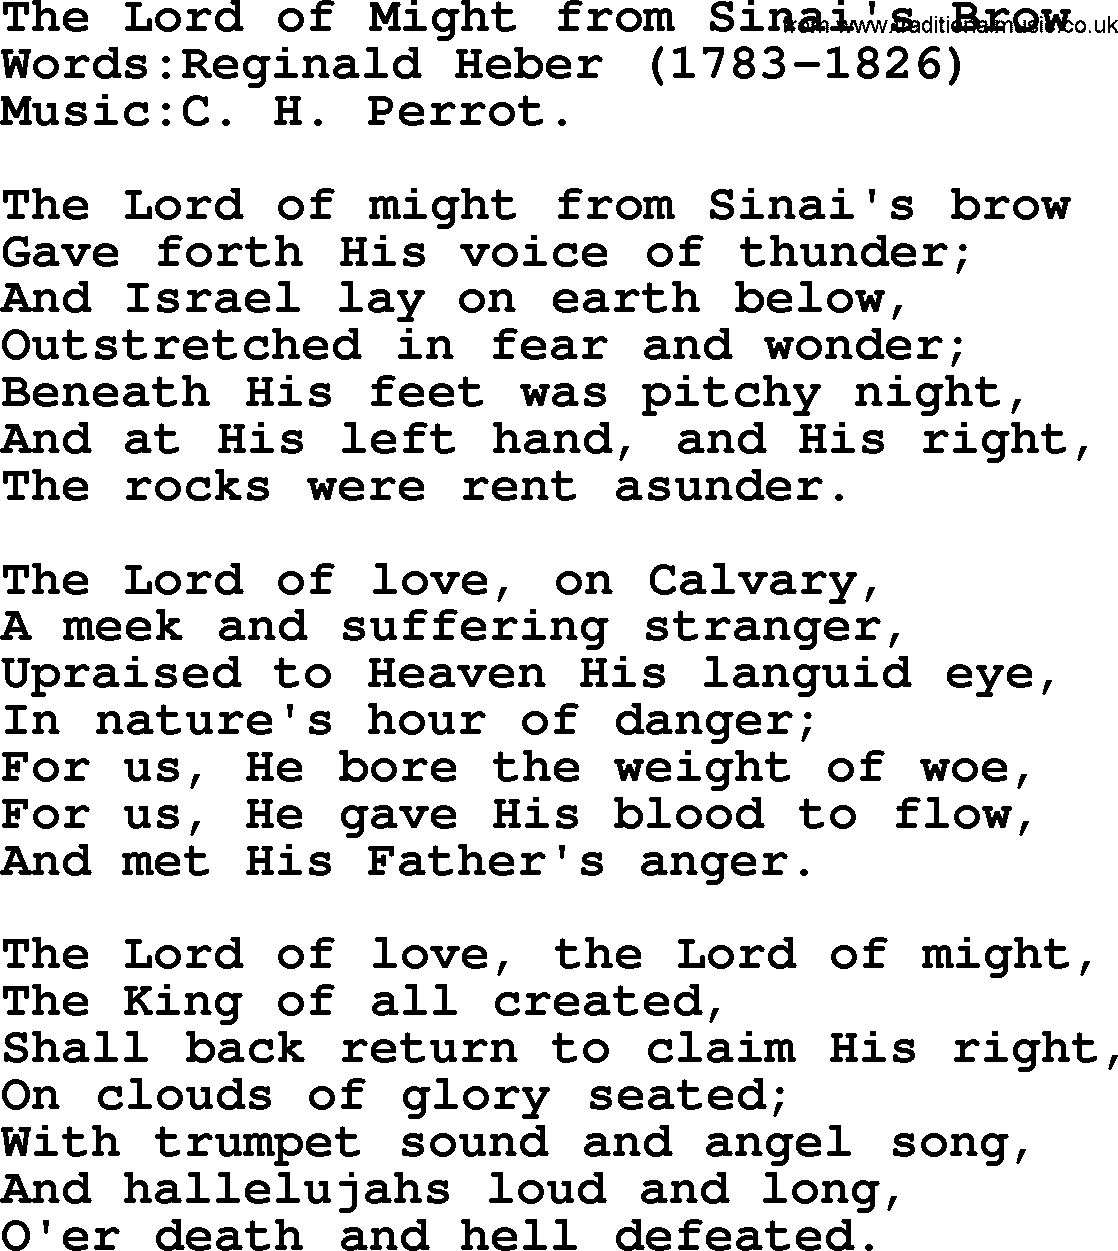 Christian hymns and songs about Jesus' Return(The Second Coming): The Lord Of Might From Sinai's Brow, lyrics with PDF